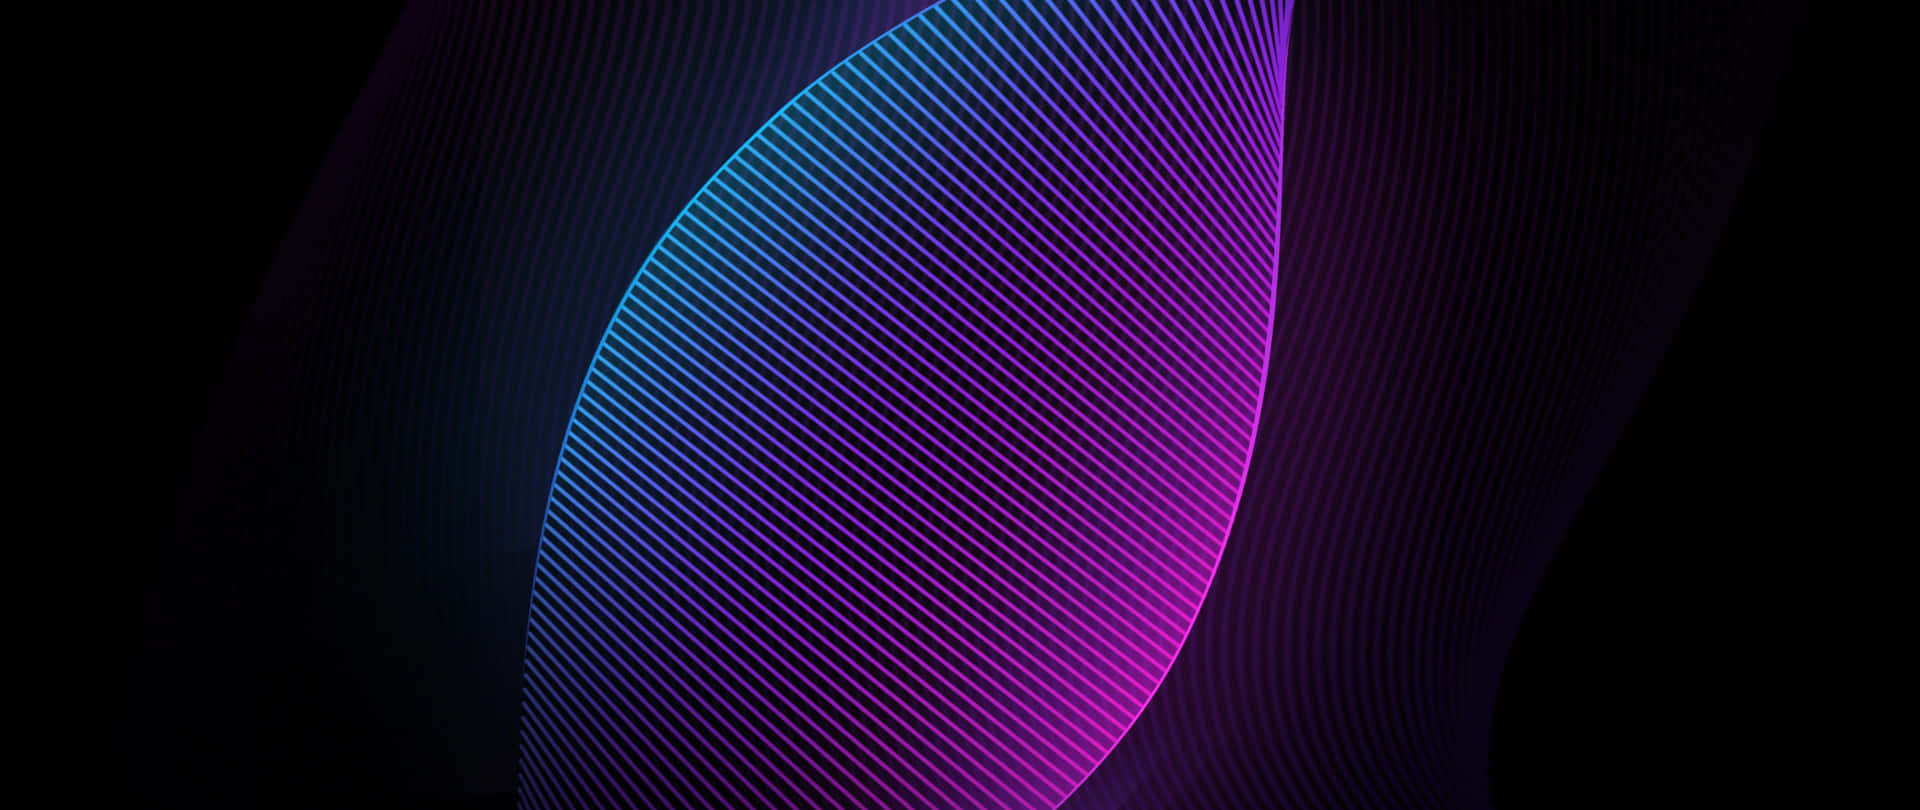 A Purple And Blue Wave Pattern On A Black Background Wallpaper